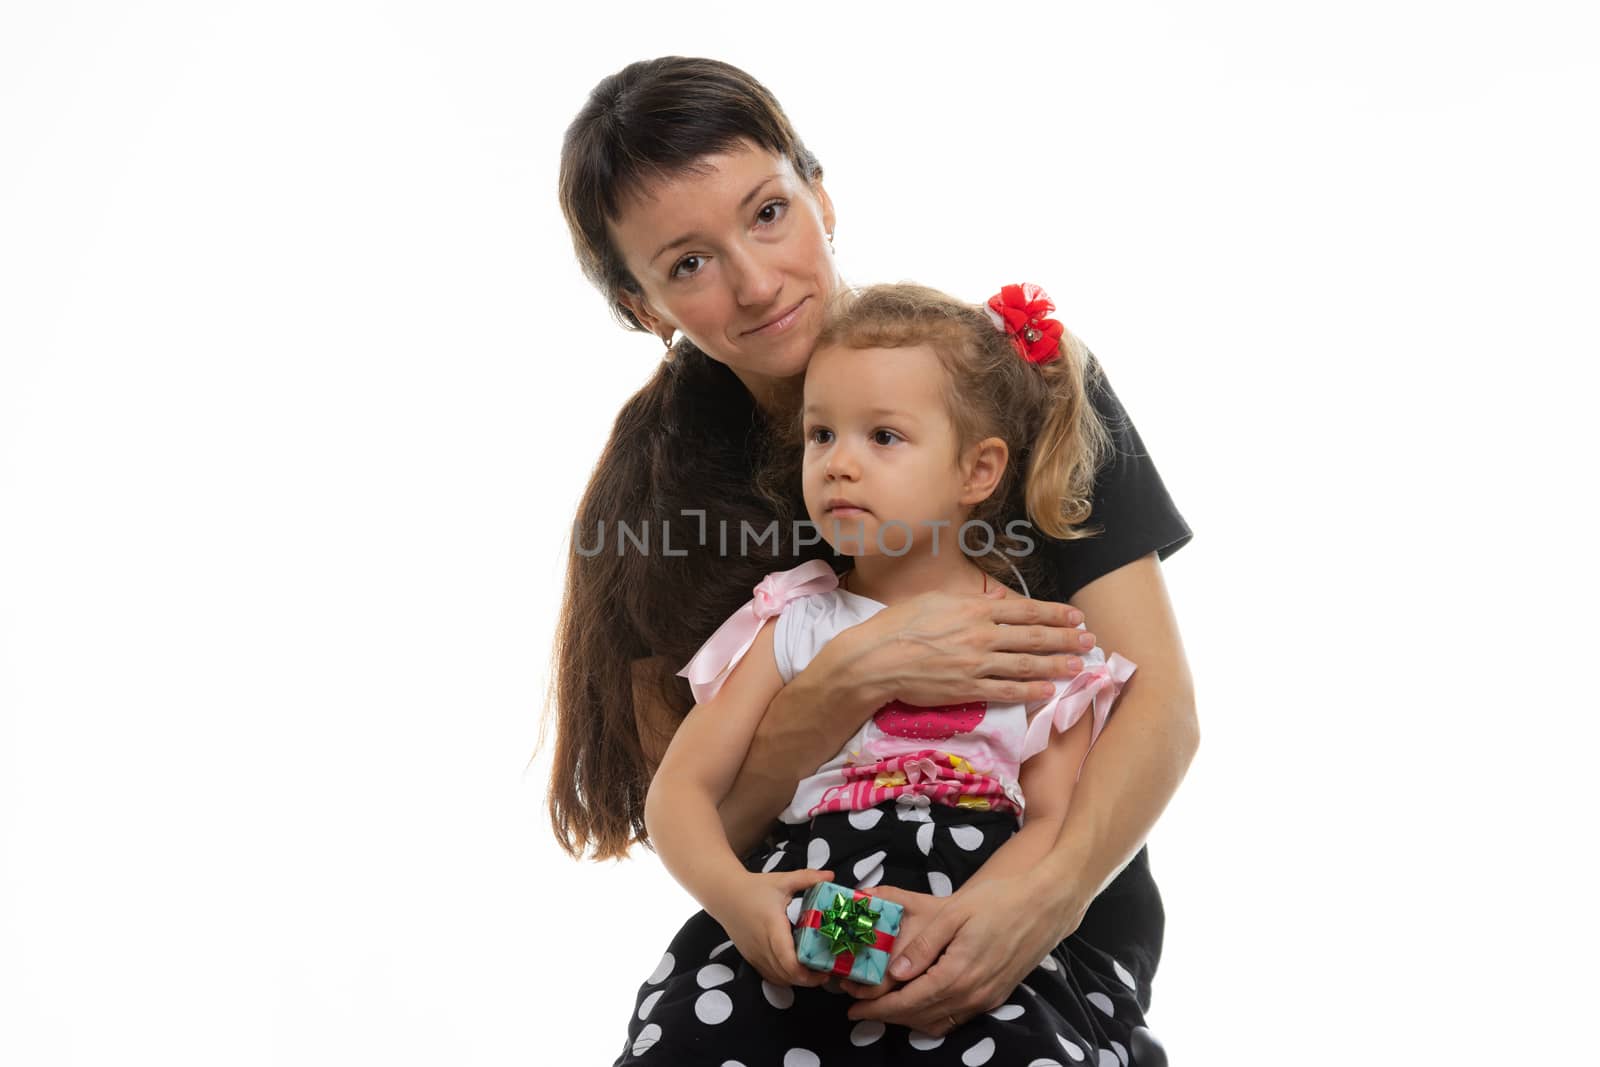 Four-year-old daughter sits on mother's lap, white background